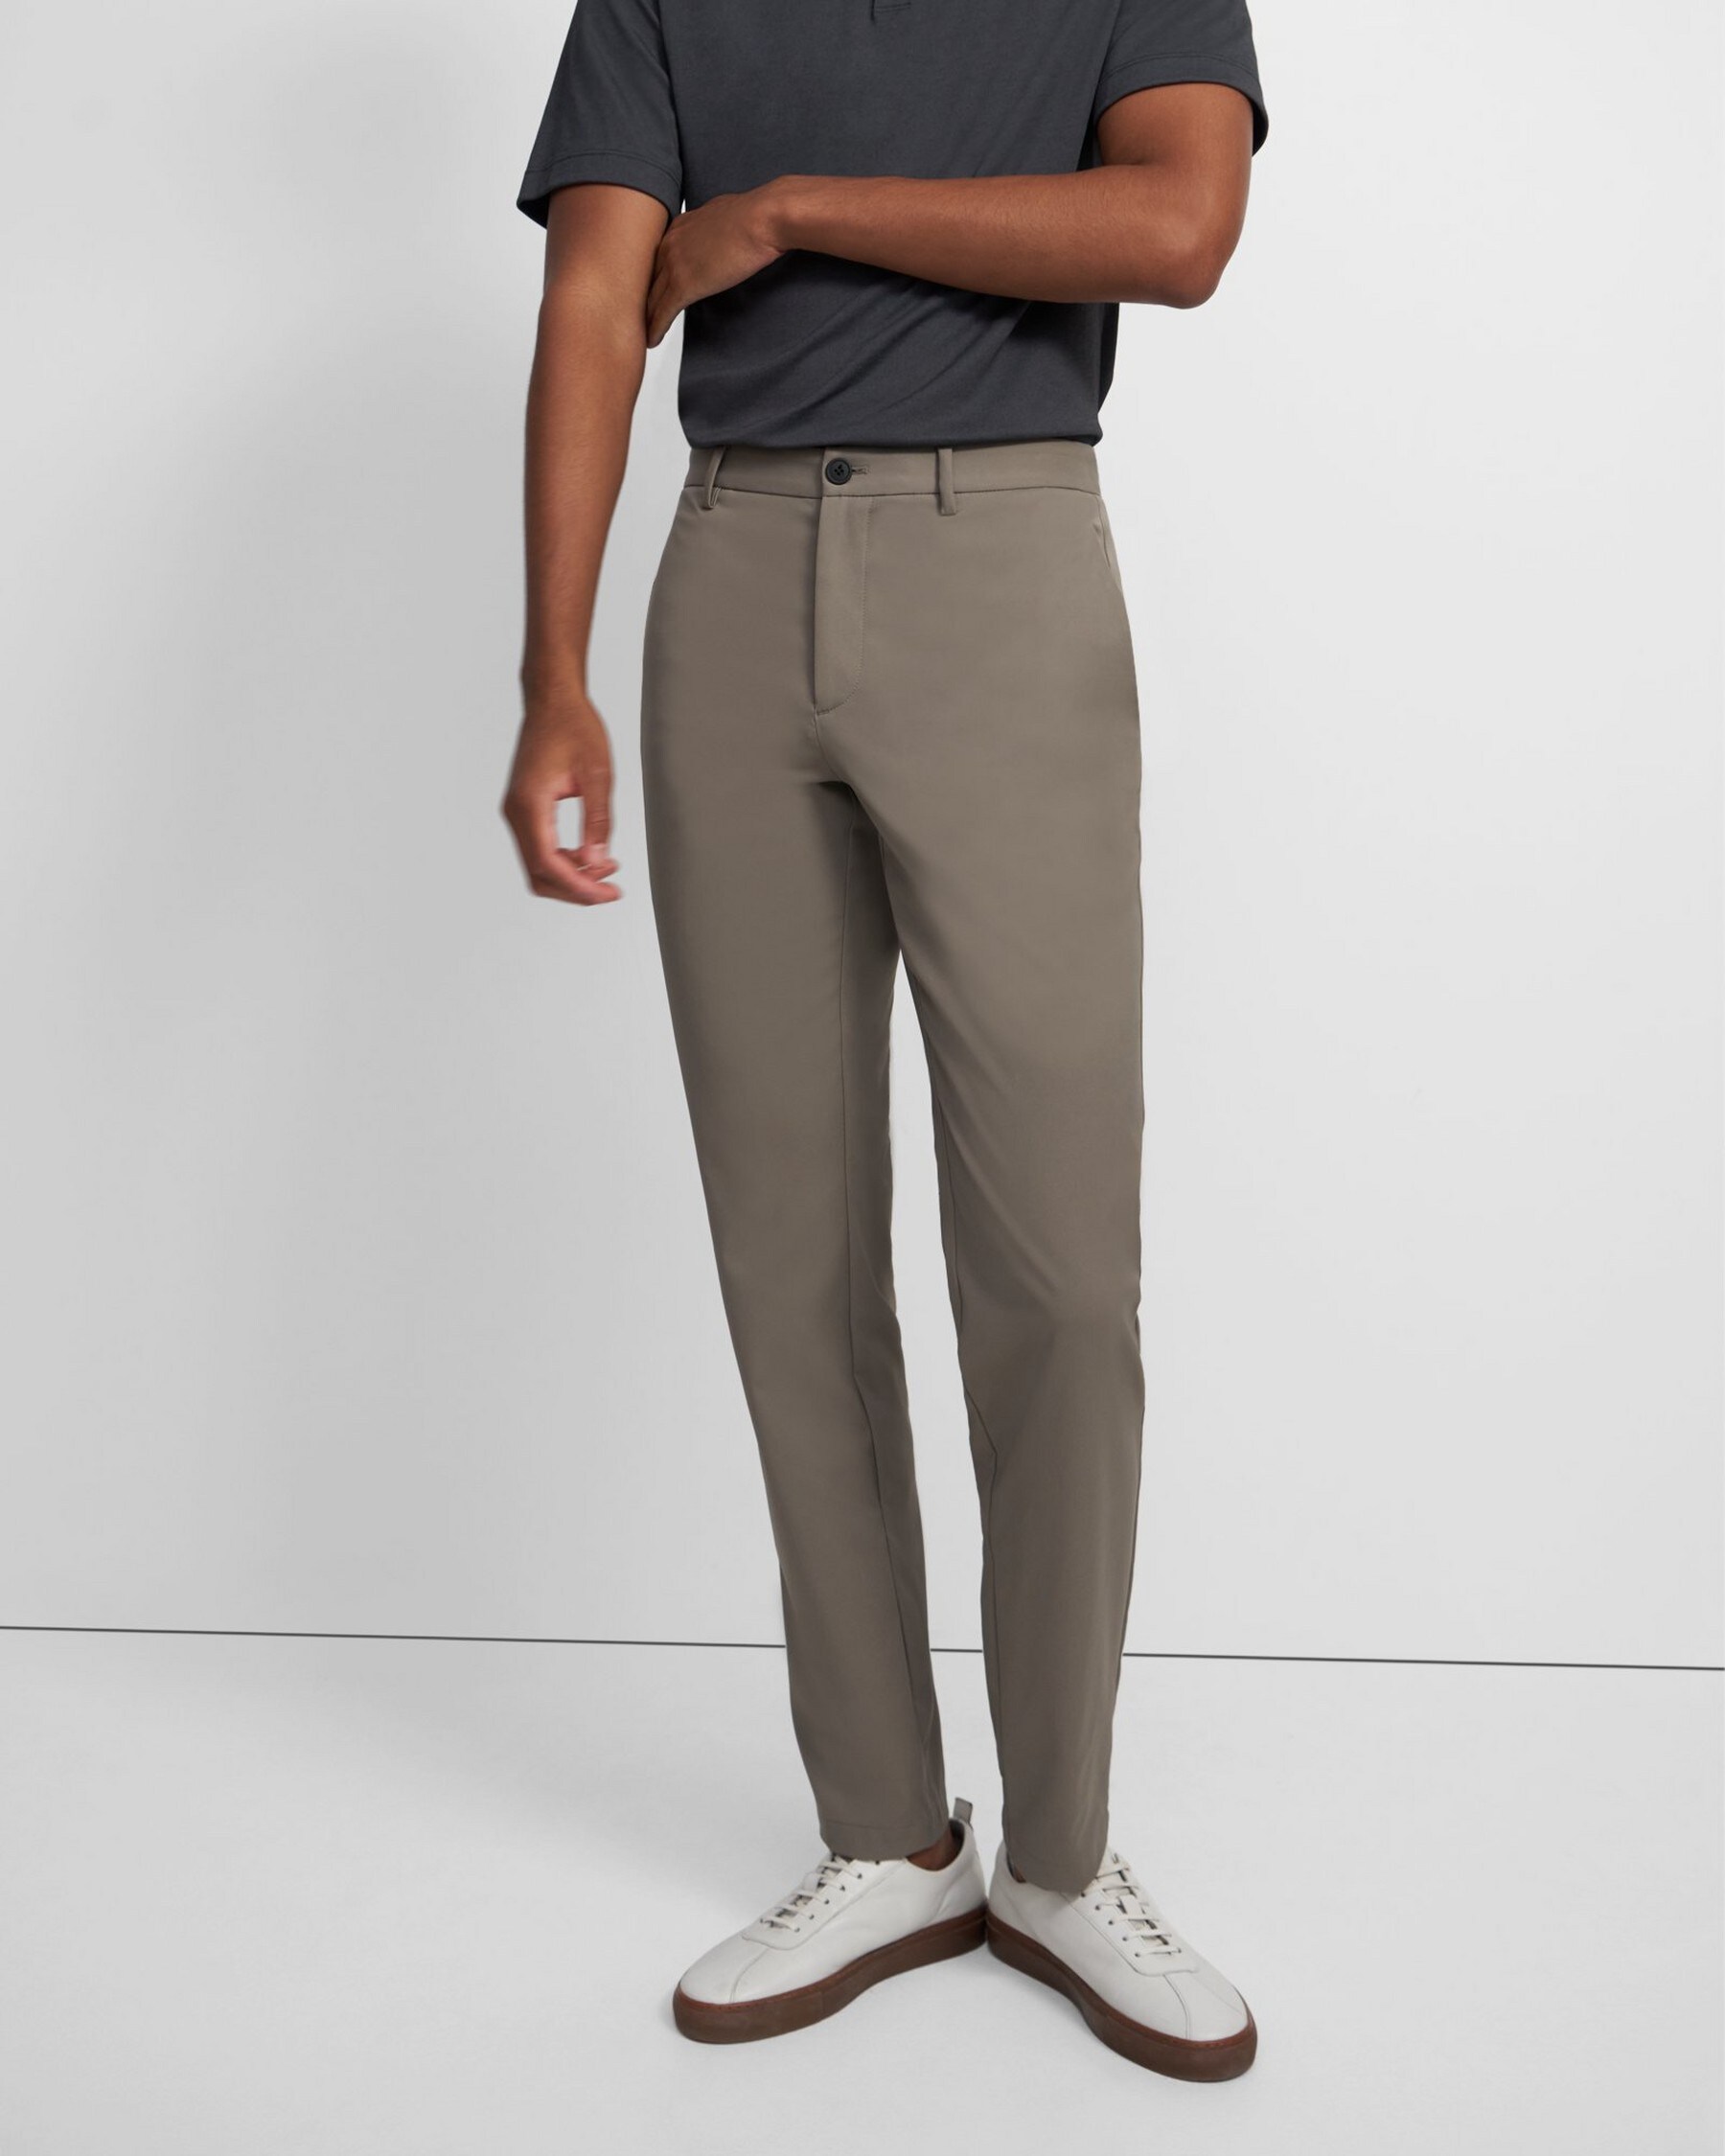 Zaine Pant in Neoteric